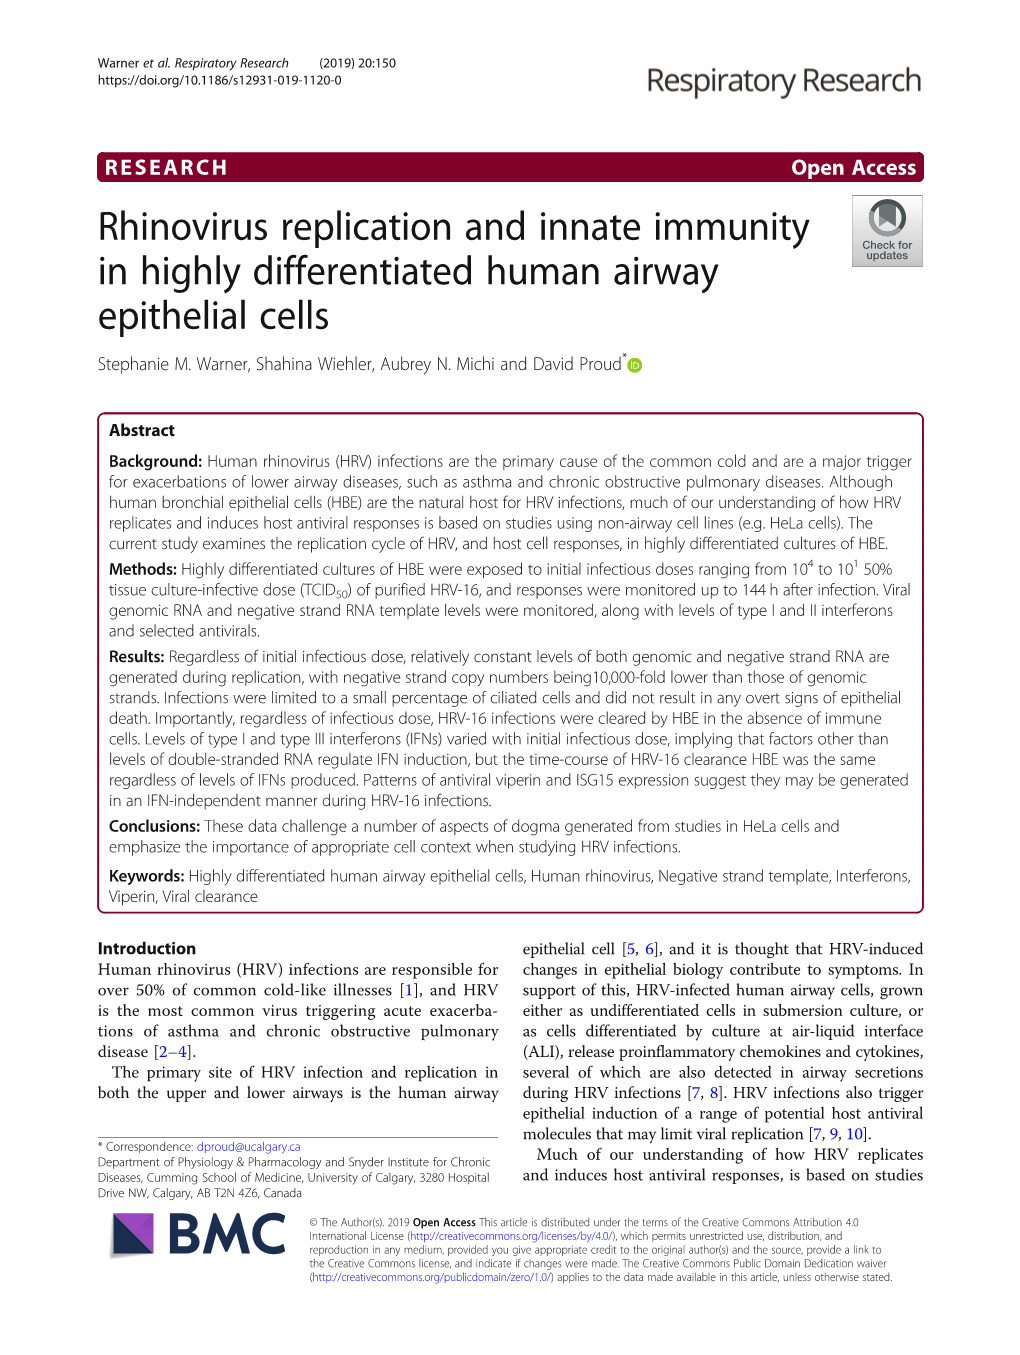 Rhinovirus Replication and Innate Immunity in Highly Differentiated Human Airway Epithelial Cells Stephanie M